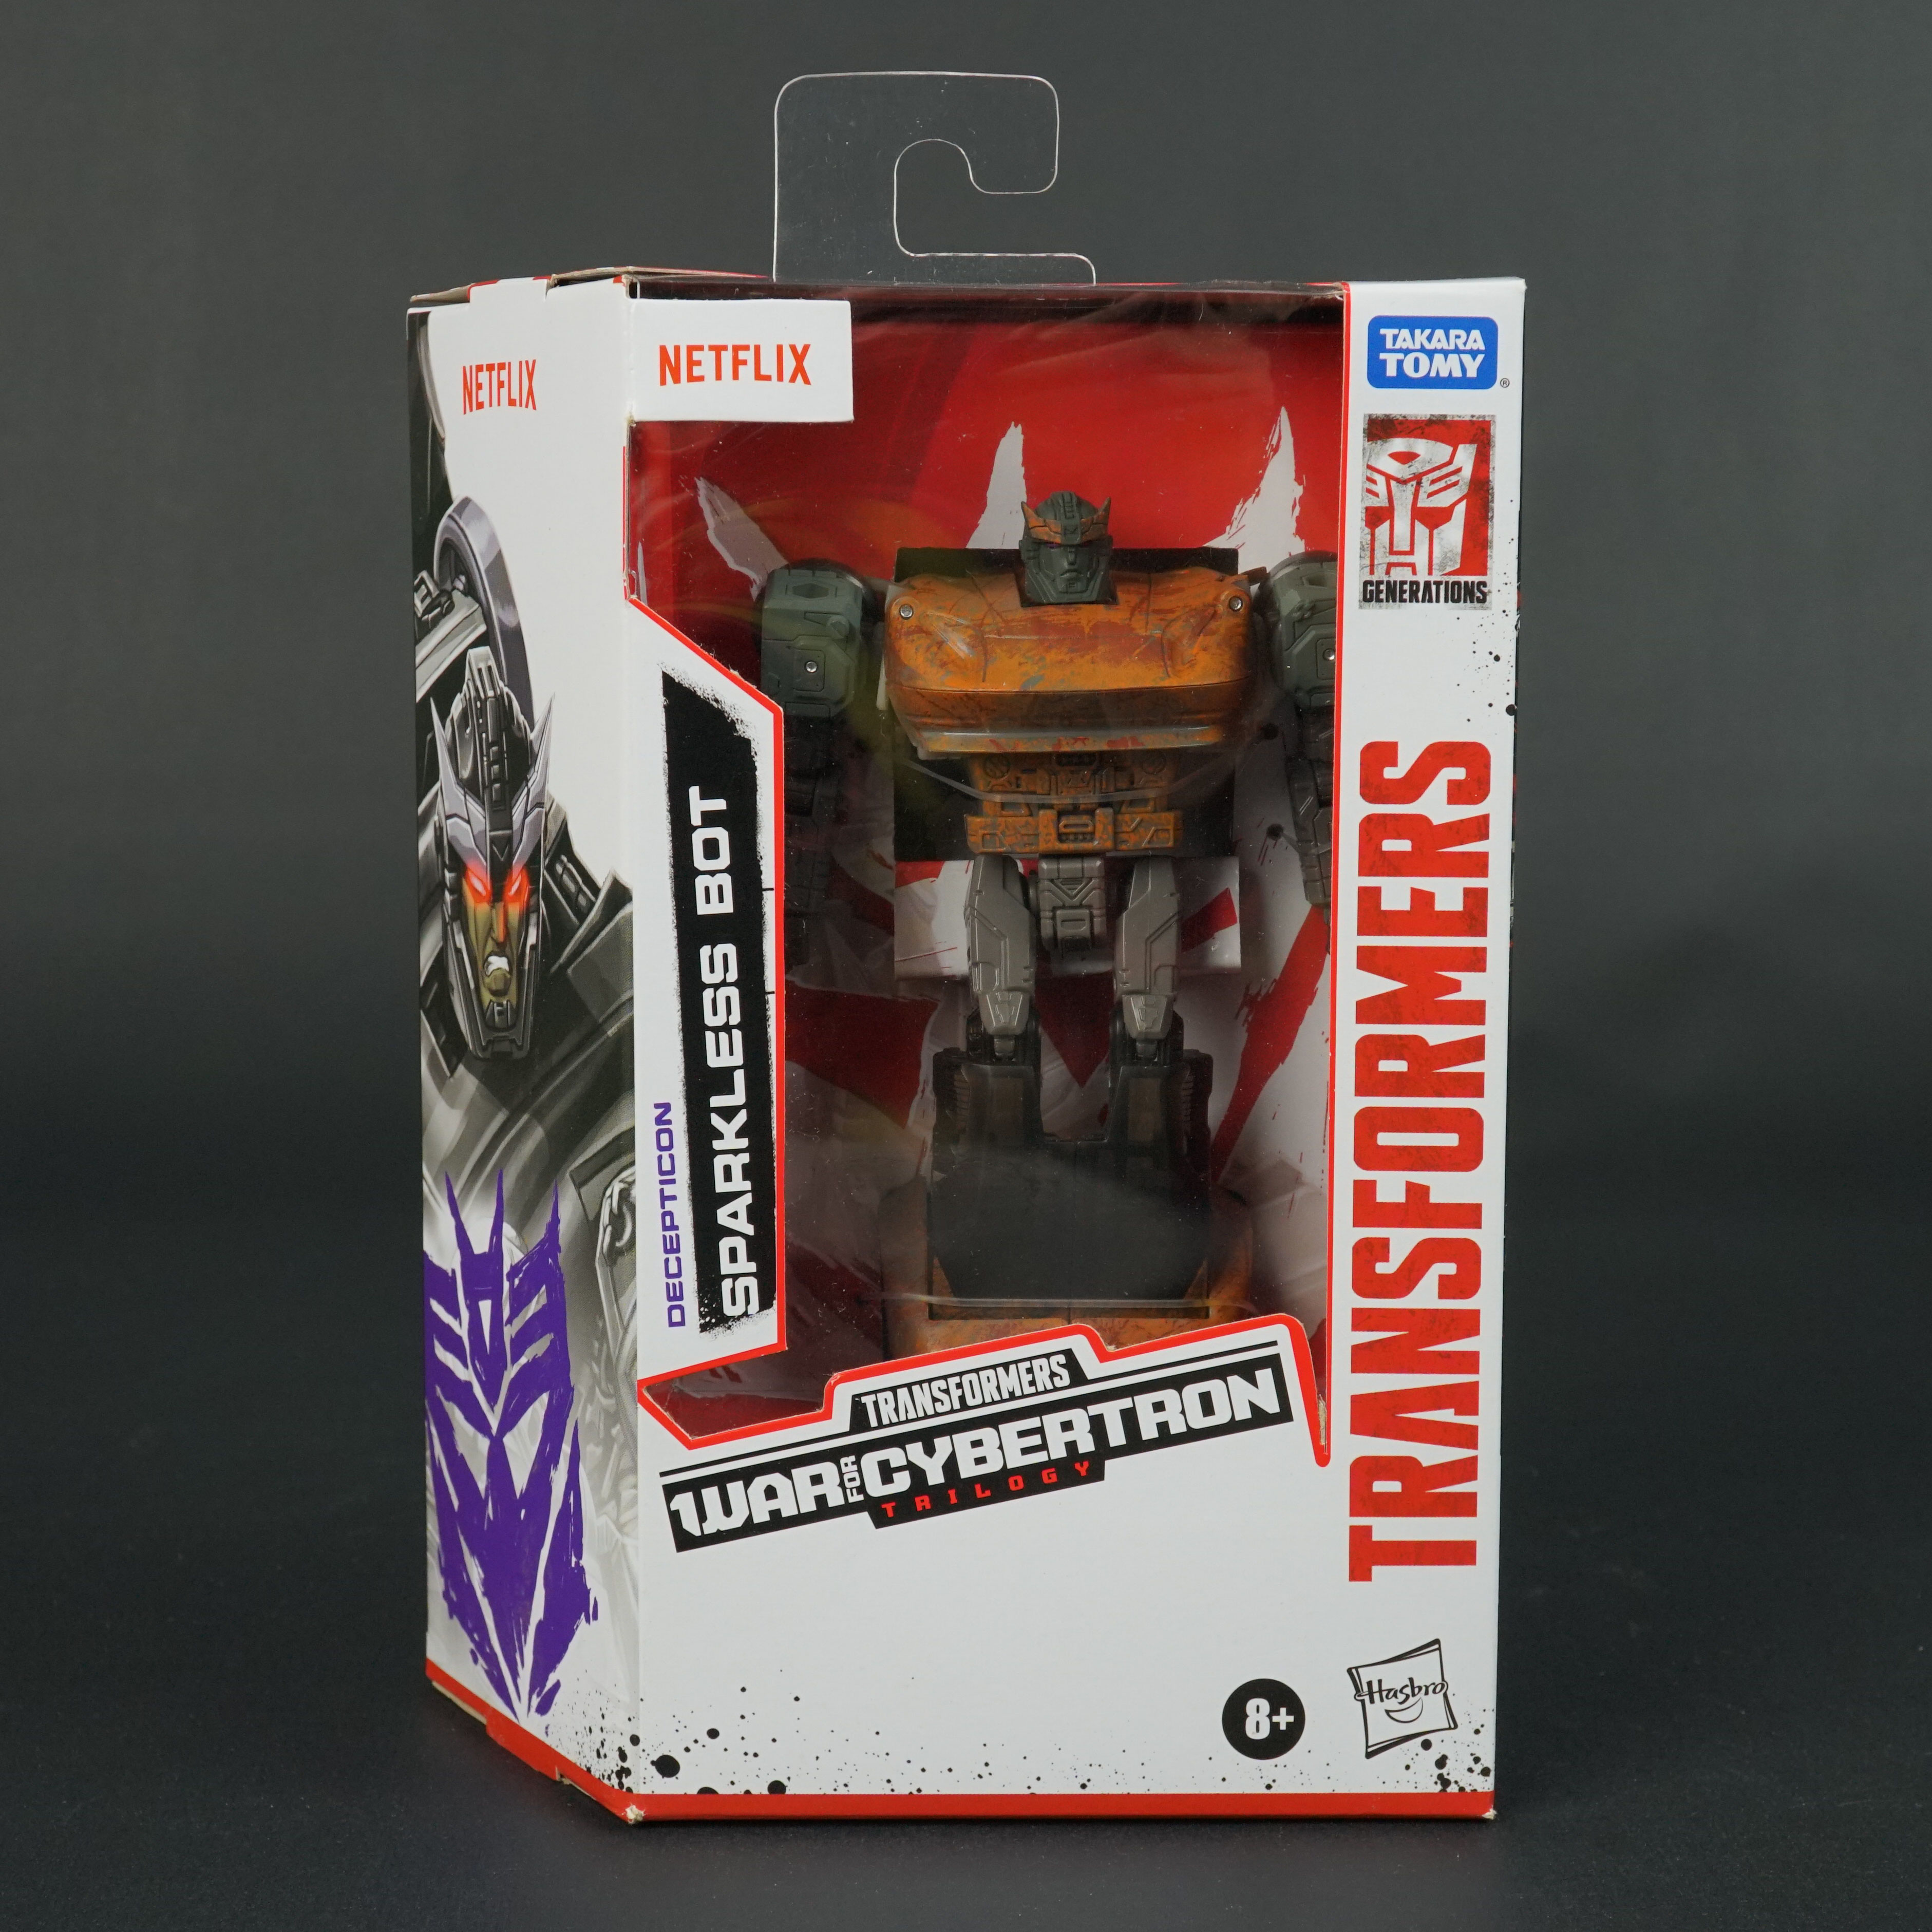 SPARKLESS BOT Transformers War for Cybertron Trilogy Deluxe Netflix 2021 New